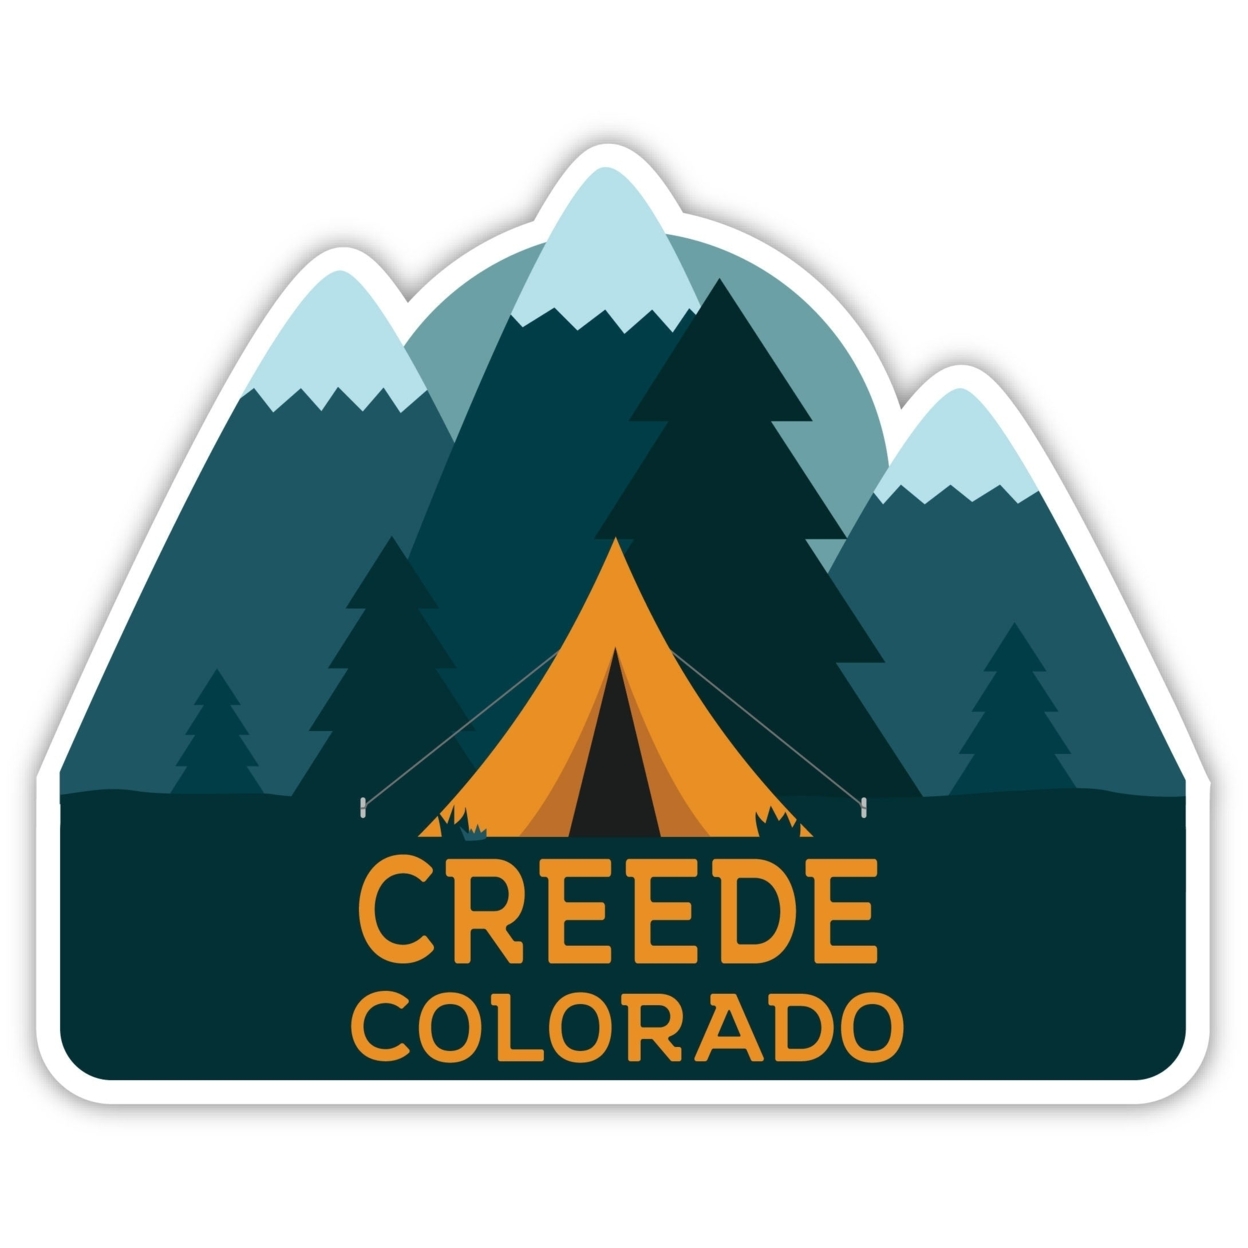 Creede Colorado Souvenir Decorative Stickers (Choose Theme And Size) - 4-Pack, 2-Inch, Tent